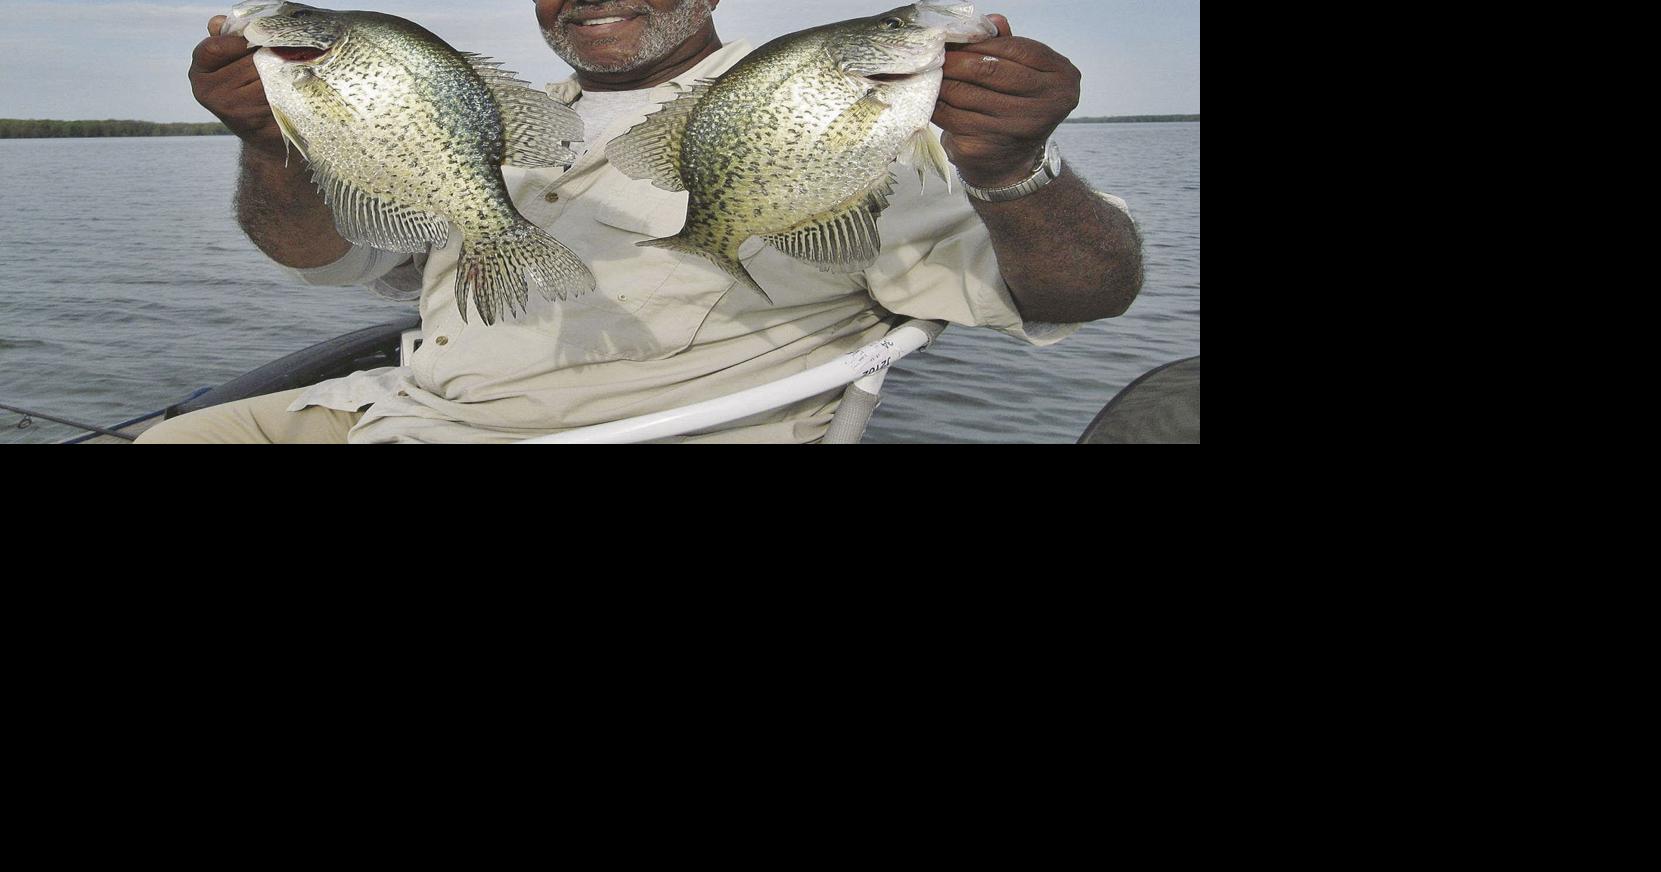 Crappie fisherman of arizona (affiliated with the National Crappie